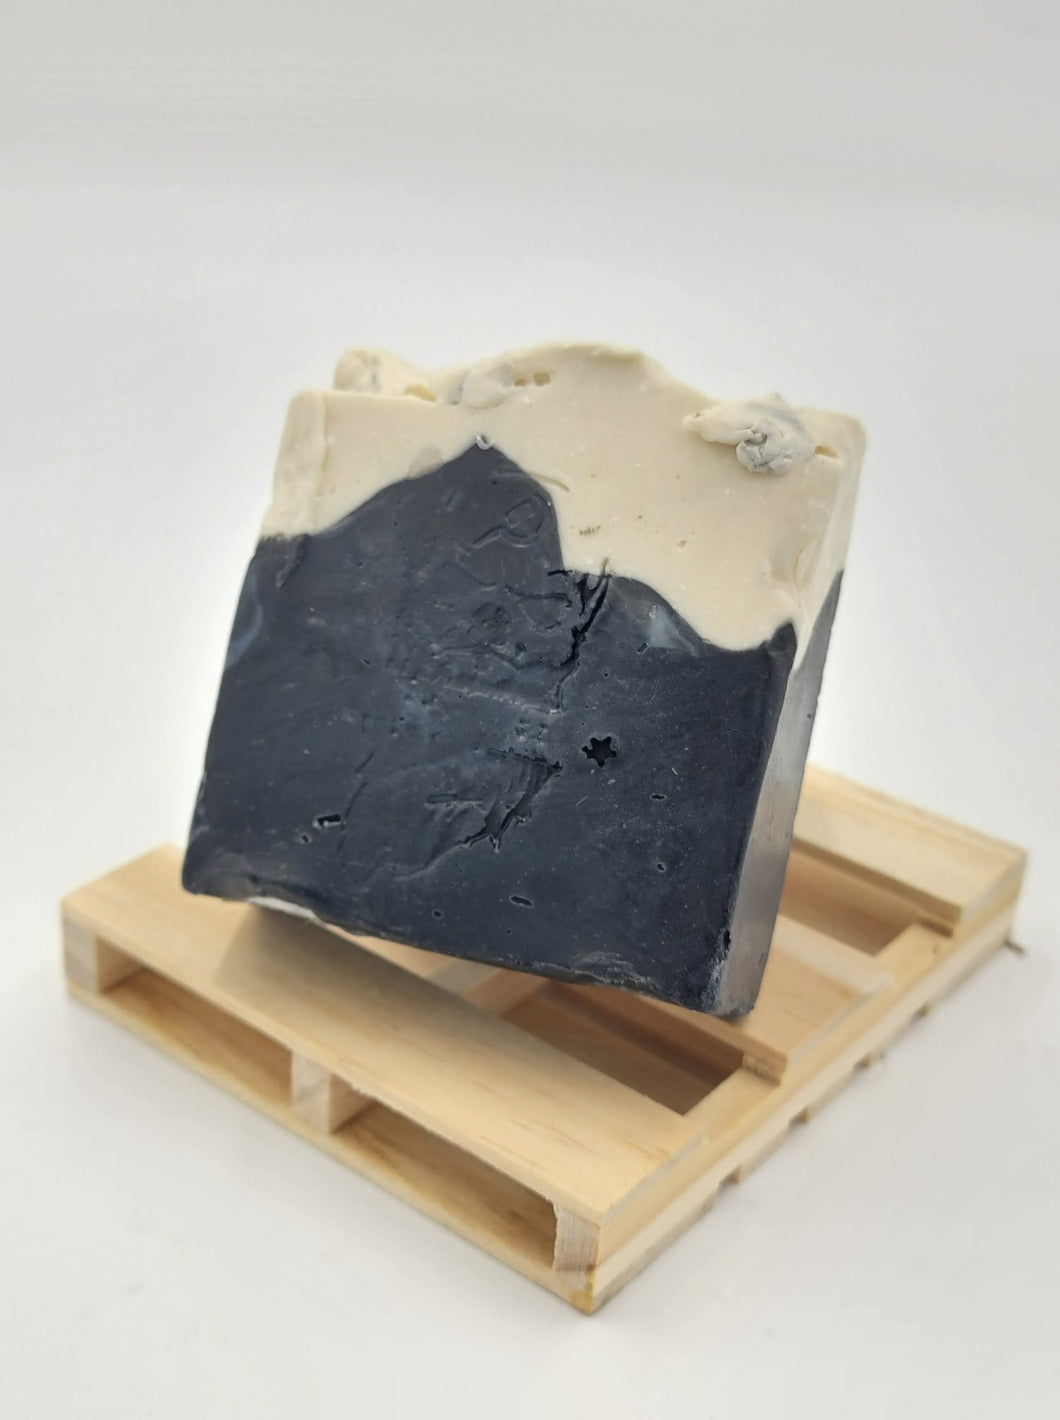 Black Charcoal activated Soap (The Russian Edition) - Straight Fire Vaporium